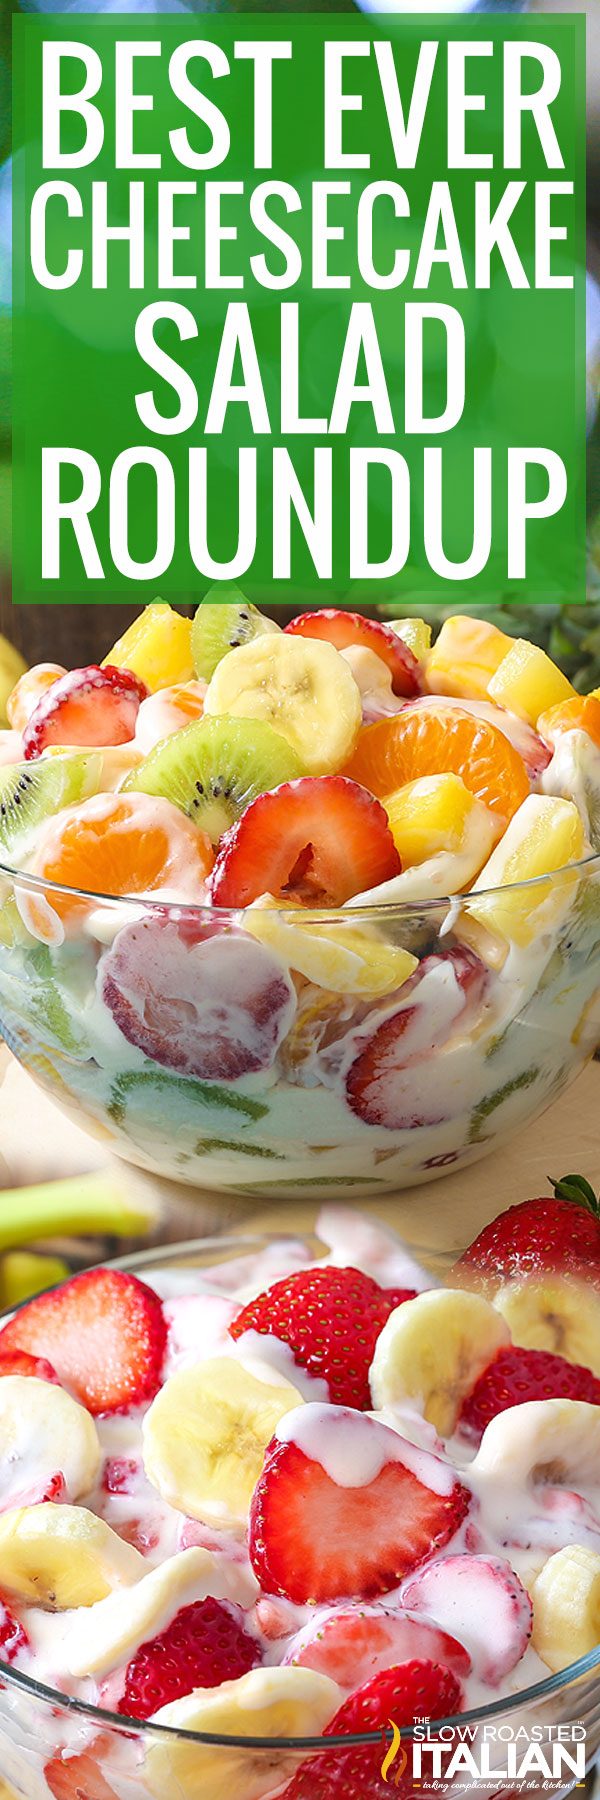 best ever cheesecake salad roundup -pin